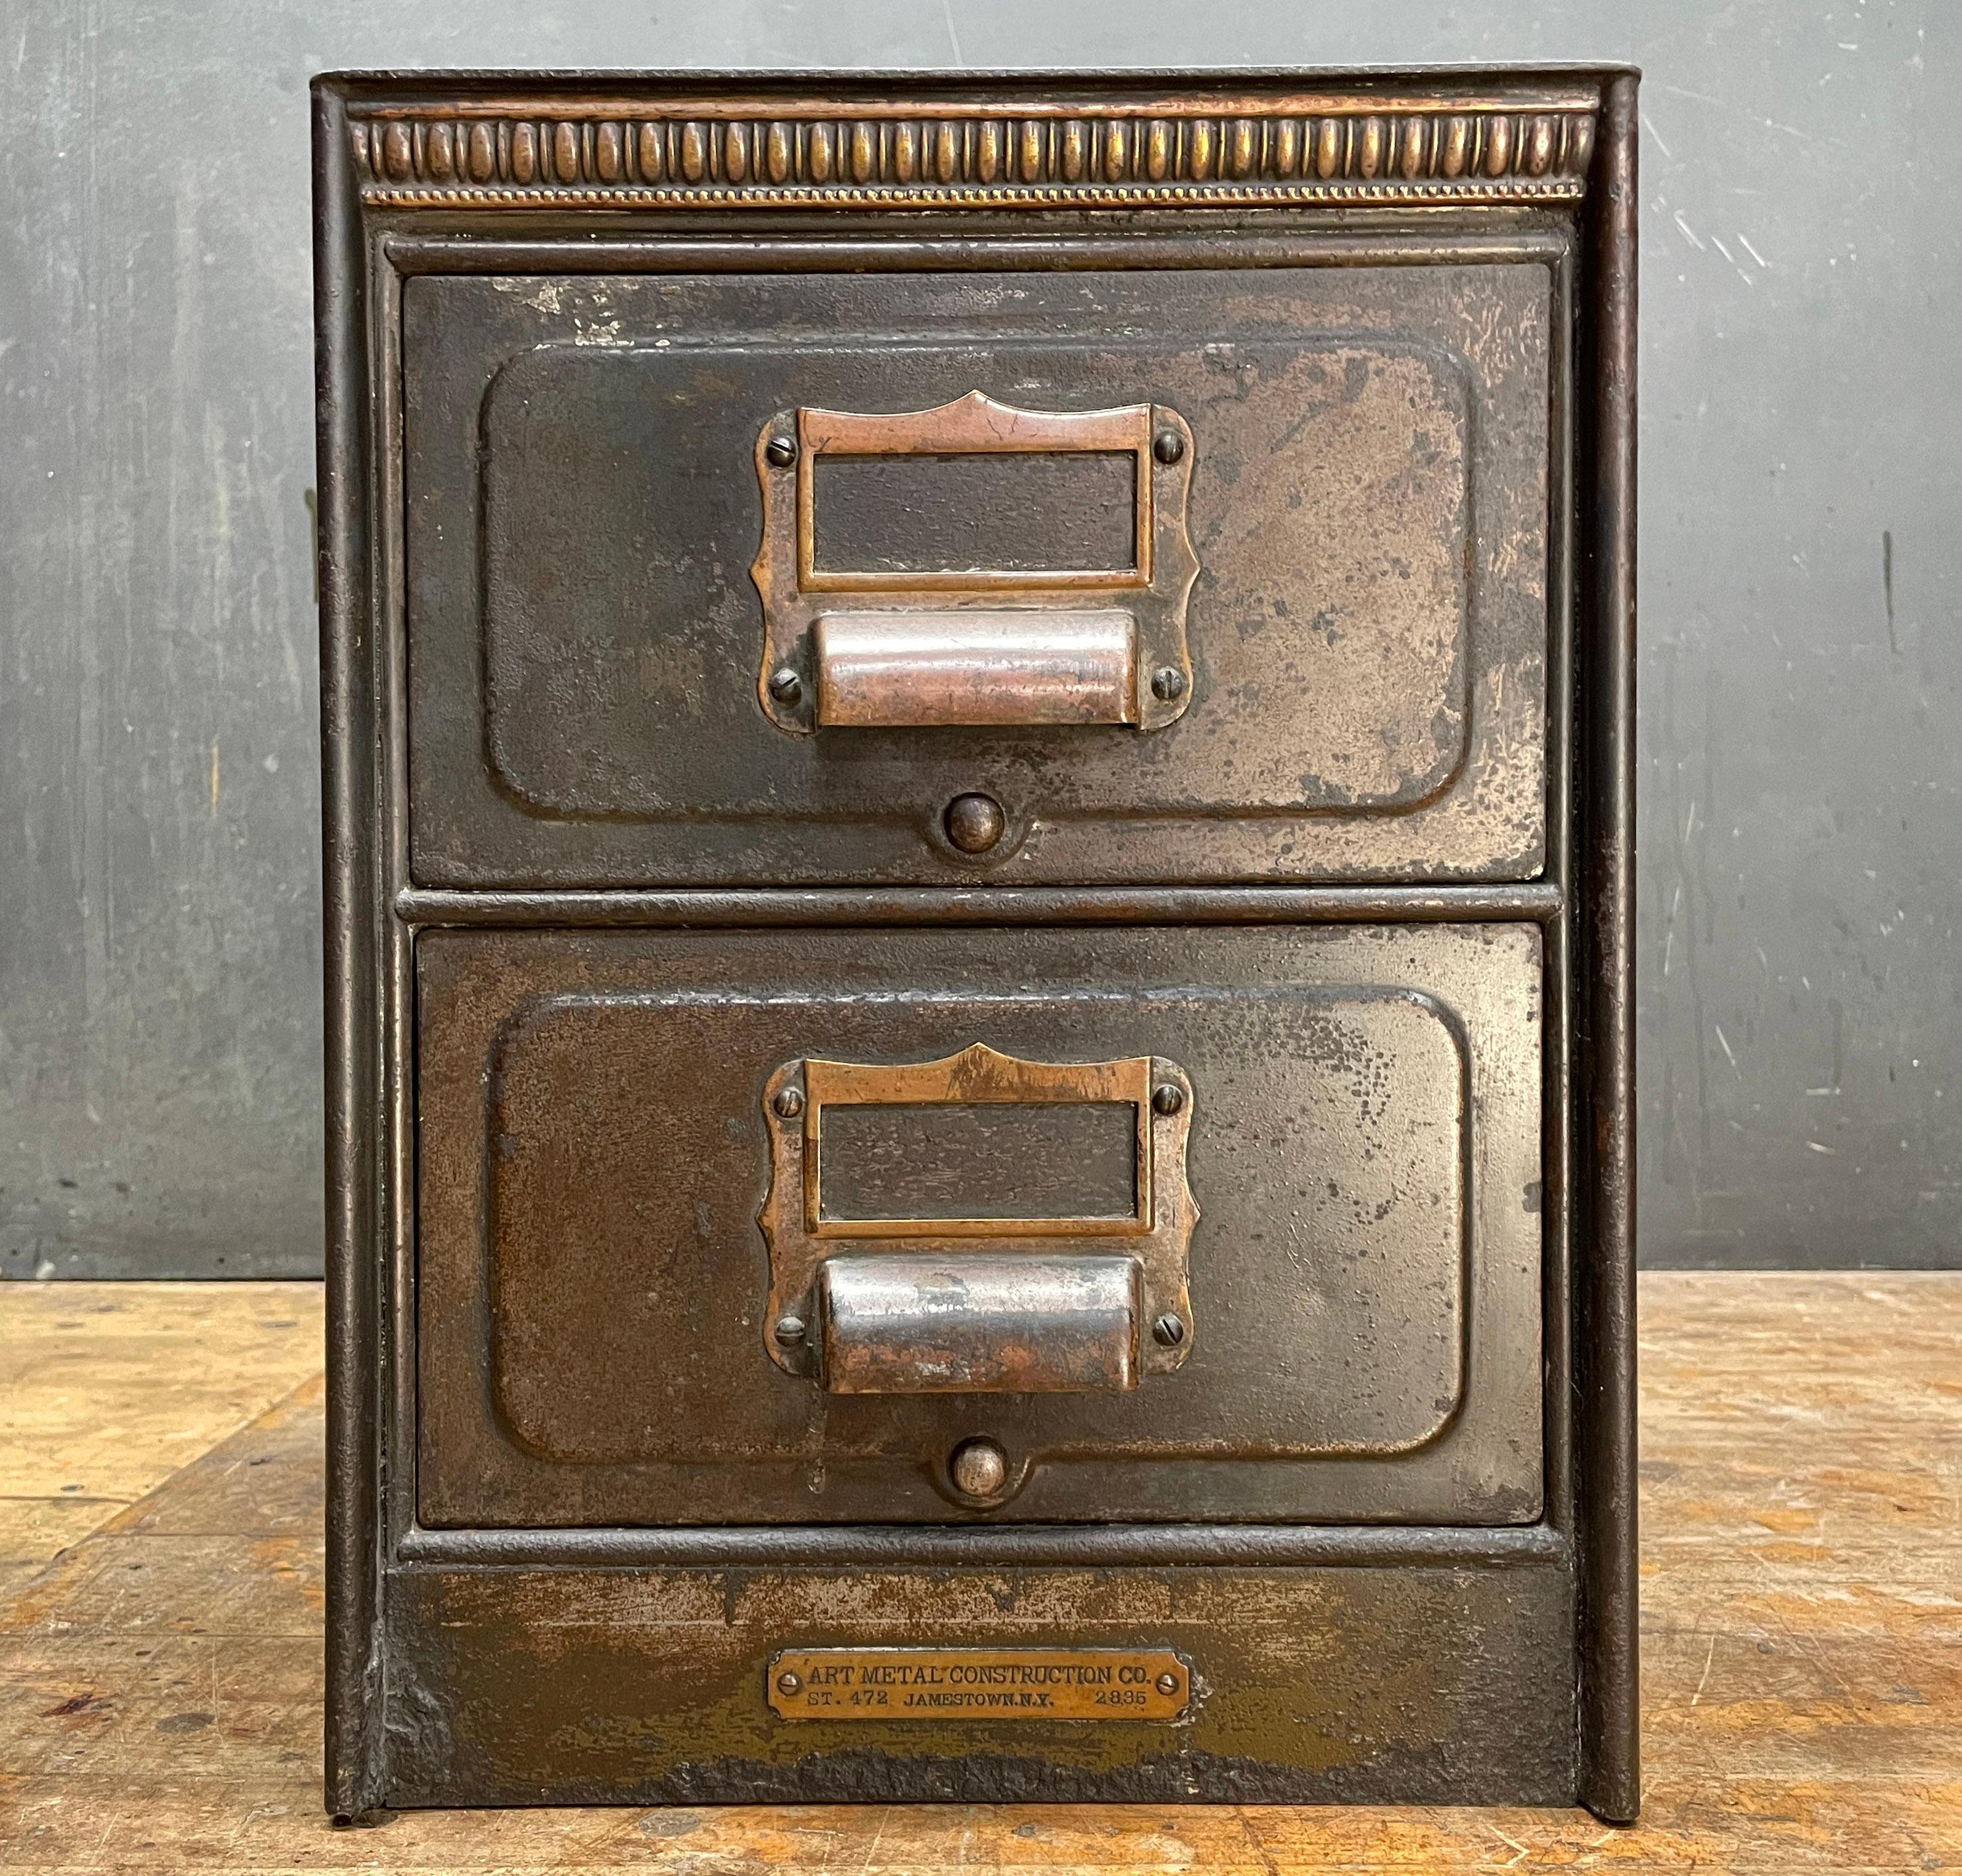 A rare and hard to find small desktop organizer by the Metal Art Construction Company of Jamestown New York. The drawer bottoms have been lined with thin wood panels. There are heavy losses from oxidation on the underside but not visible when item